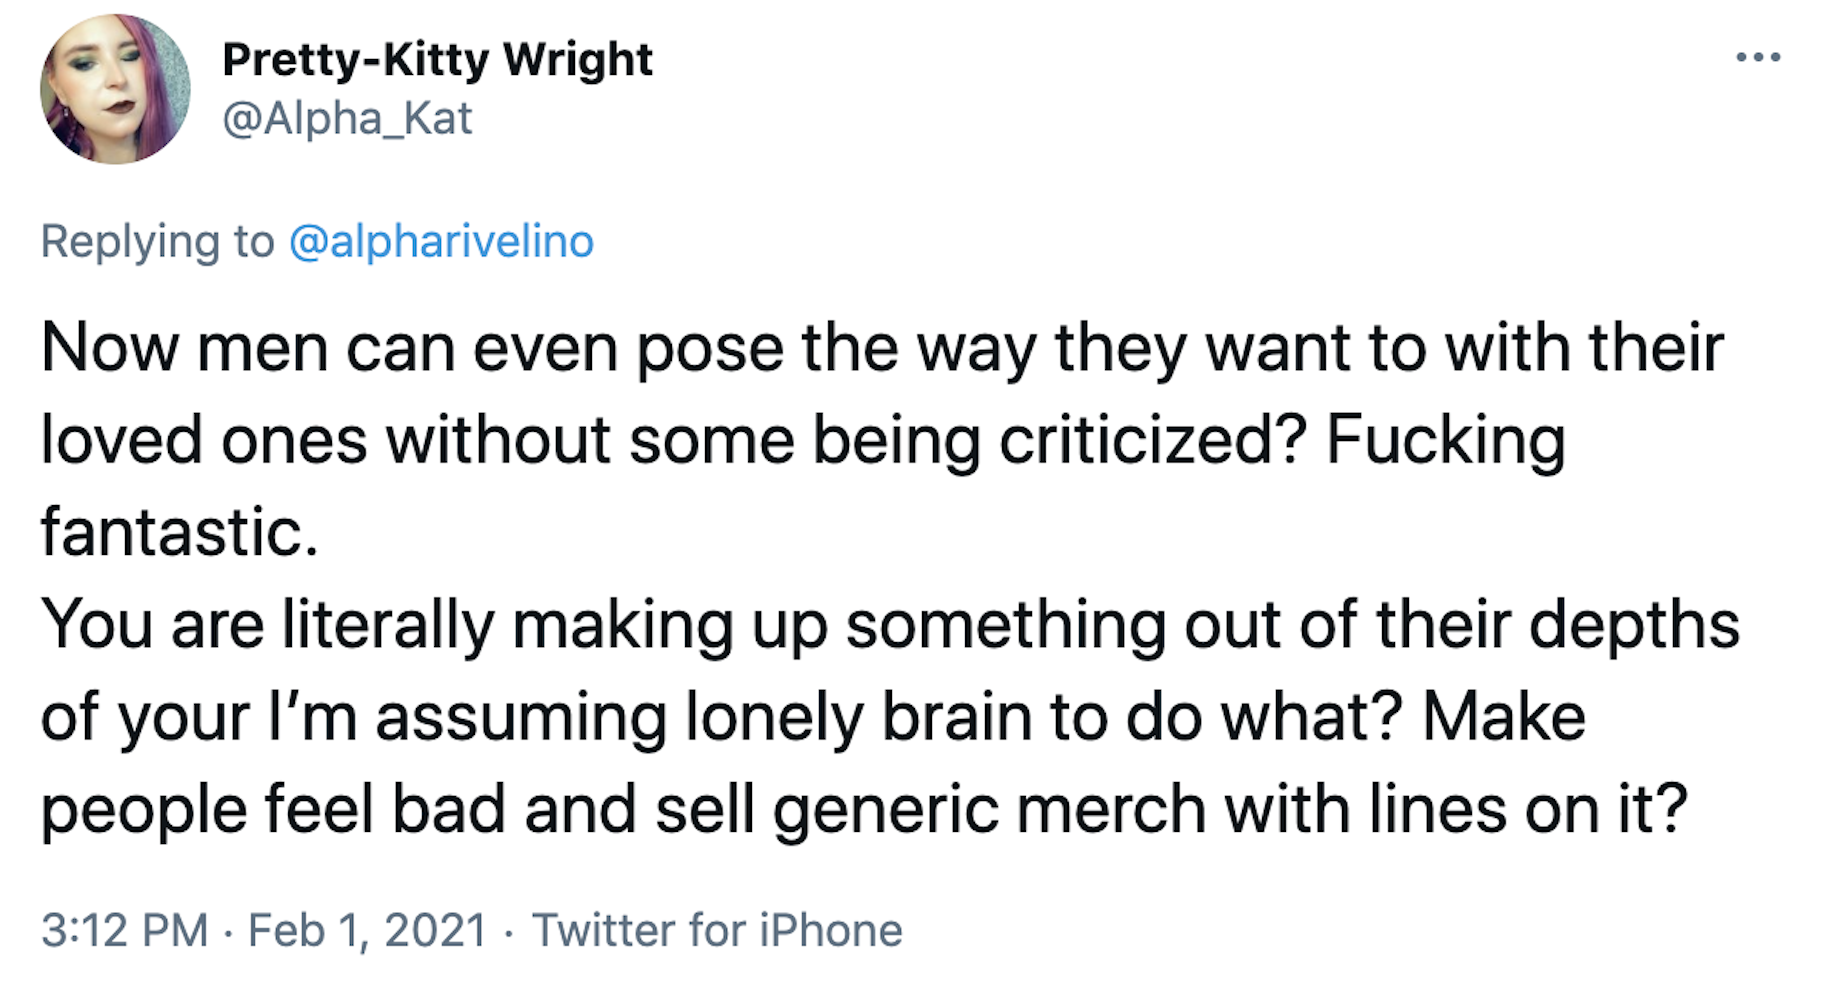 Now men can even pose the way they want to with their loved ones without some being criticized? Fucking fantastic. You are literally making up something out of their depths of your I’m assuming lonely brain to do what? Make people feel bad and sell generic merch with lines on it?